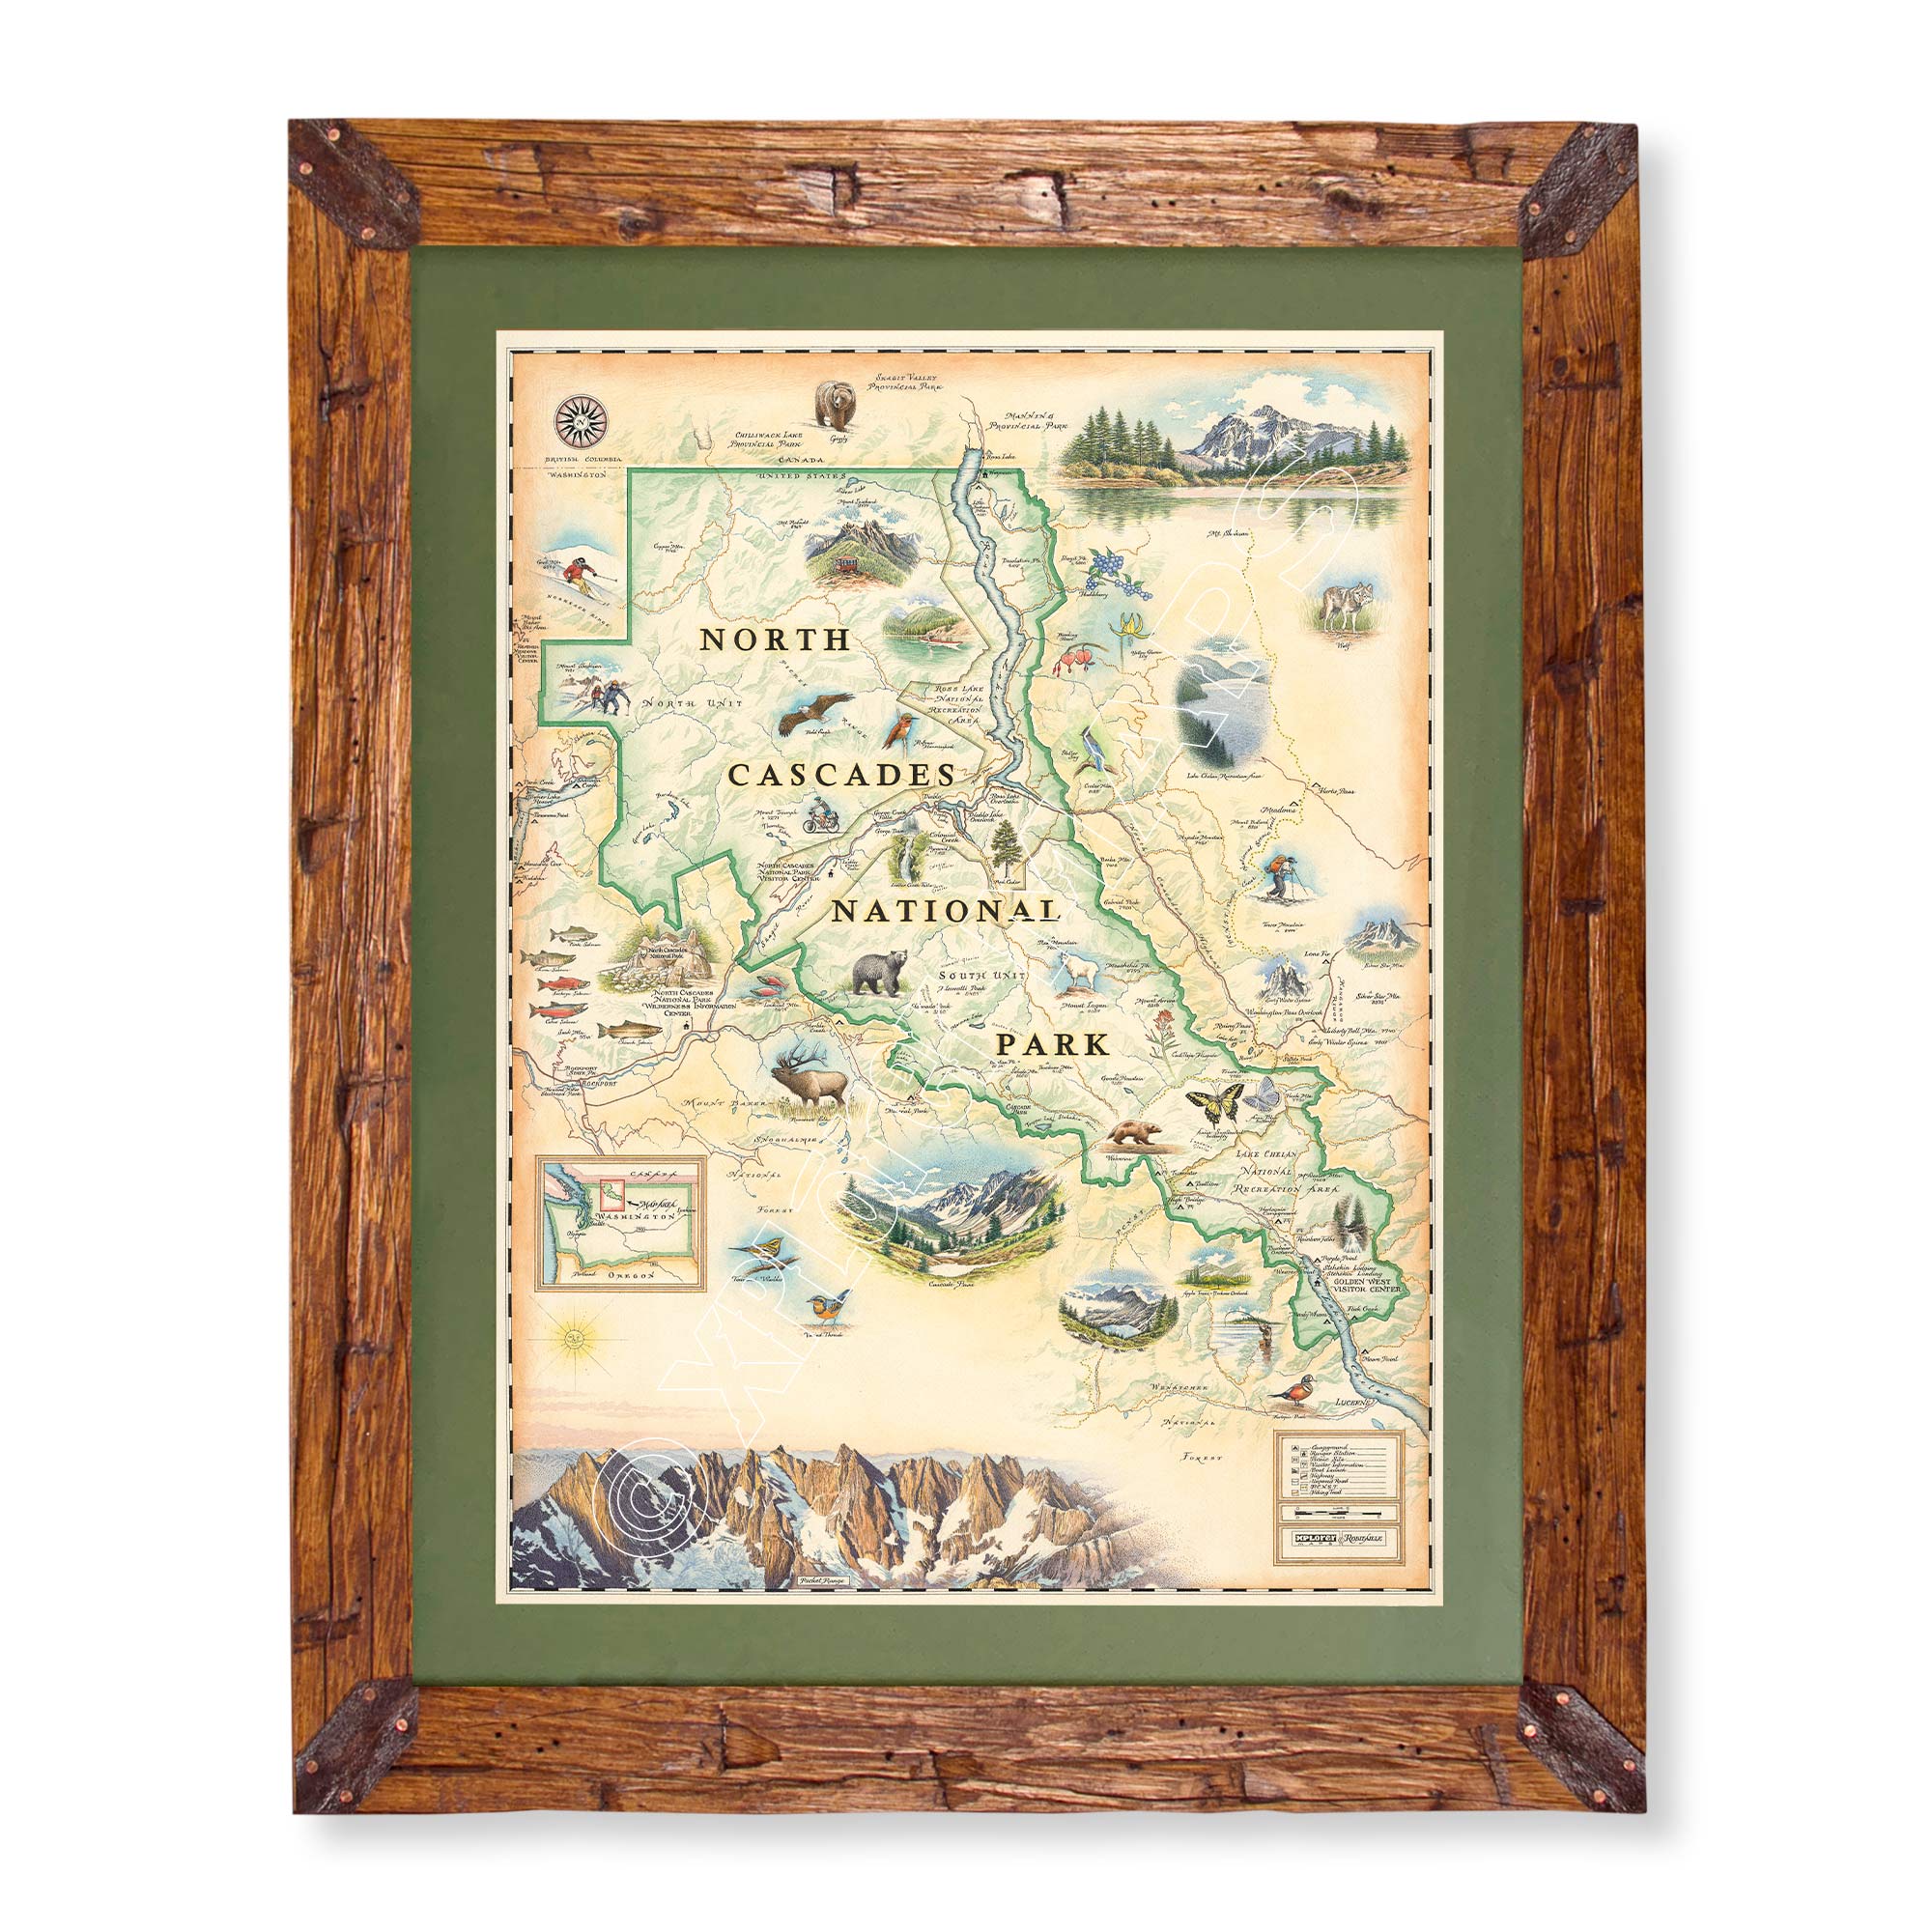 North Cascades National Park hand-drawn map in earth tones blues and greens. The map print is framed in Montana hand-scraped pine with a green mat.